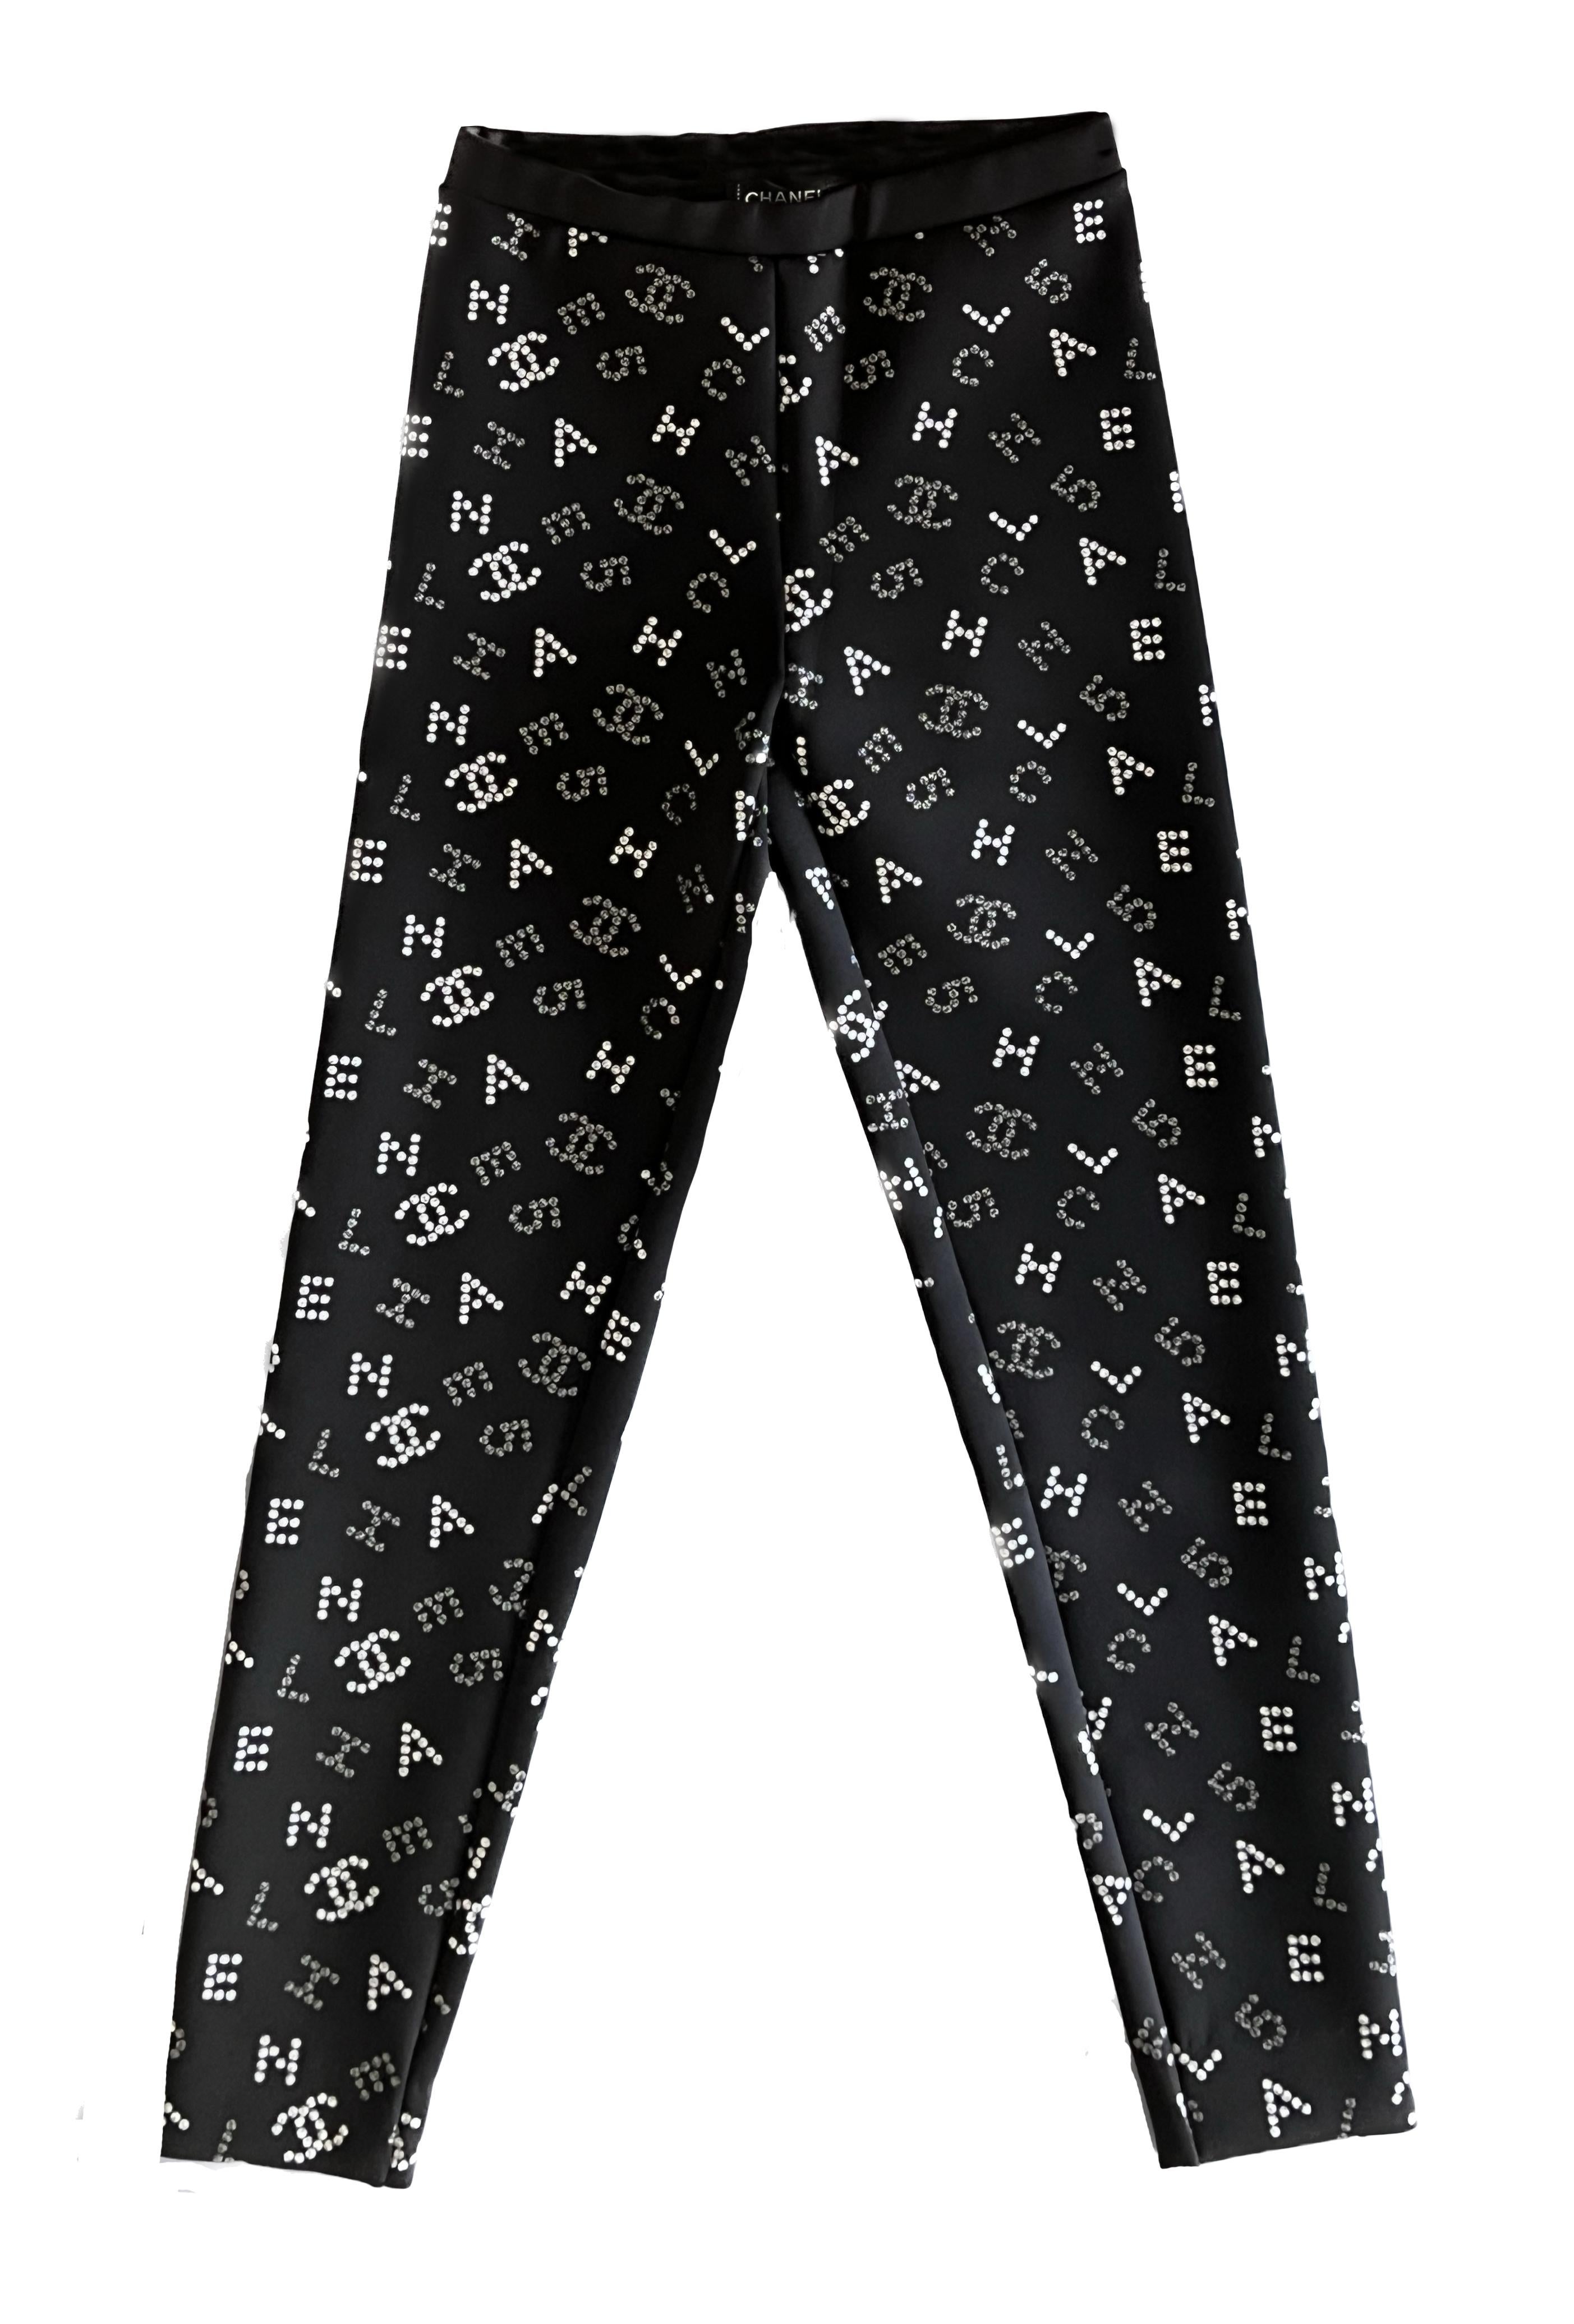  Instantly sold out in all boutiques!
Most hunted Chanel CC logo leggings from Runway of 2020 Cruise collection, 20C
Size mark 34 fr. NEVER WORN, comes with paper pouch.
As seen on Ad Campaign of that season and on many fashion influencers!
